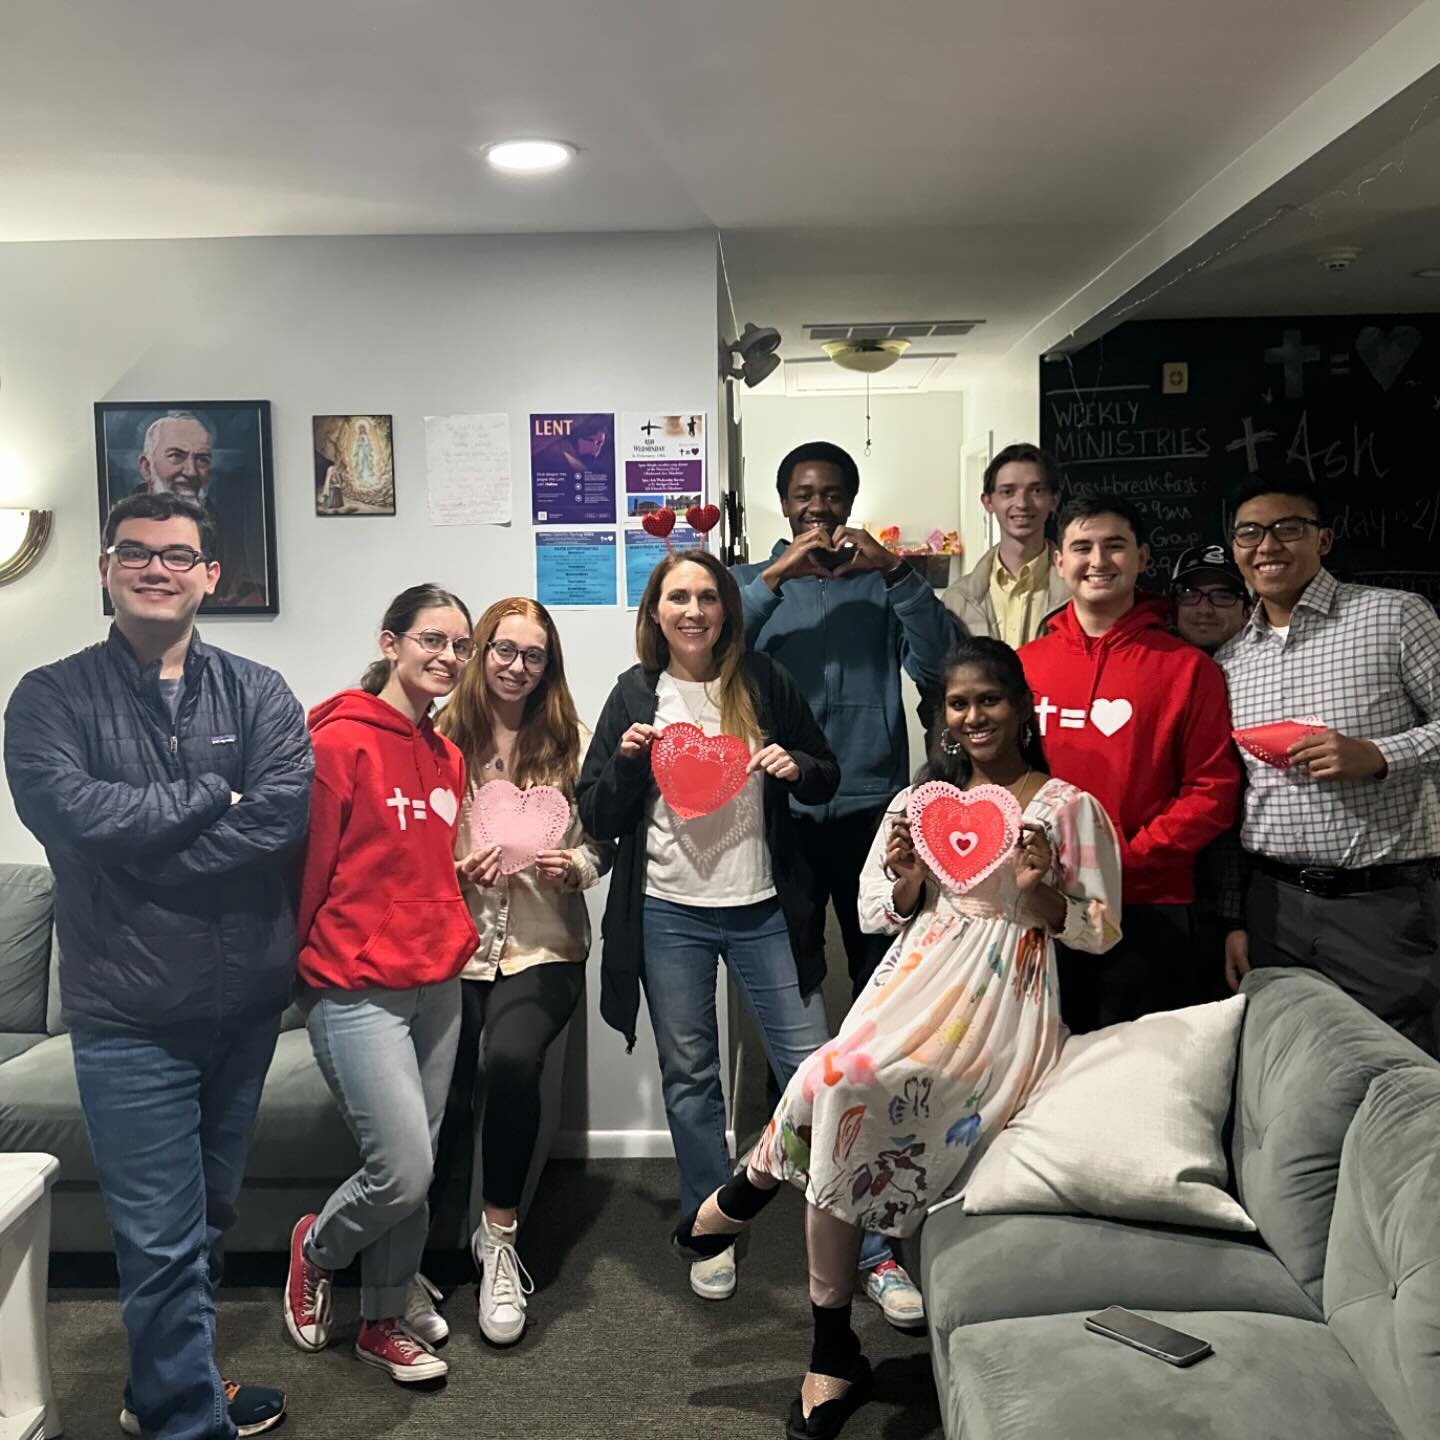 St. Valentine&rsquo;s Day party tonight at Newman! Complete with heart-shaped pizza! ❤️ 🍕💘💝❣️

 
#rowancatholic #rowanuniversity #catholicampusministry #stbridgetuniversityparish #newman #allarewelcome #springsemester  #specialevents #stvalentines